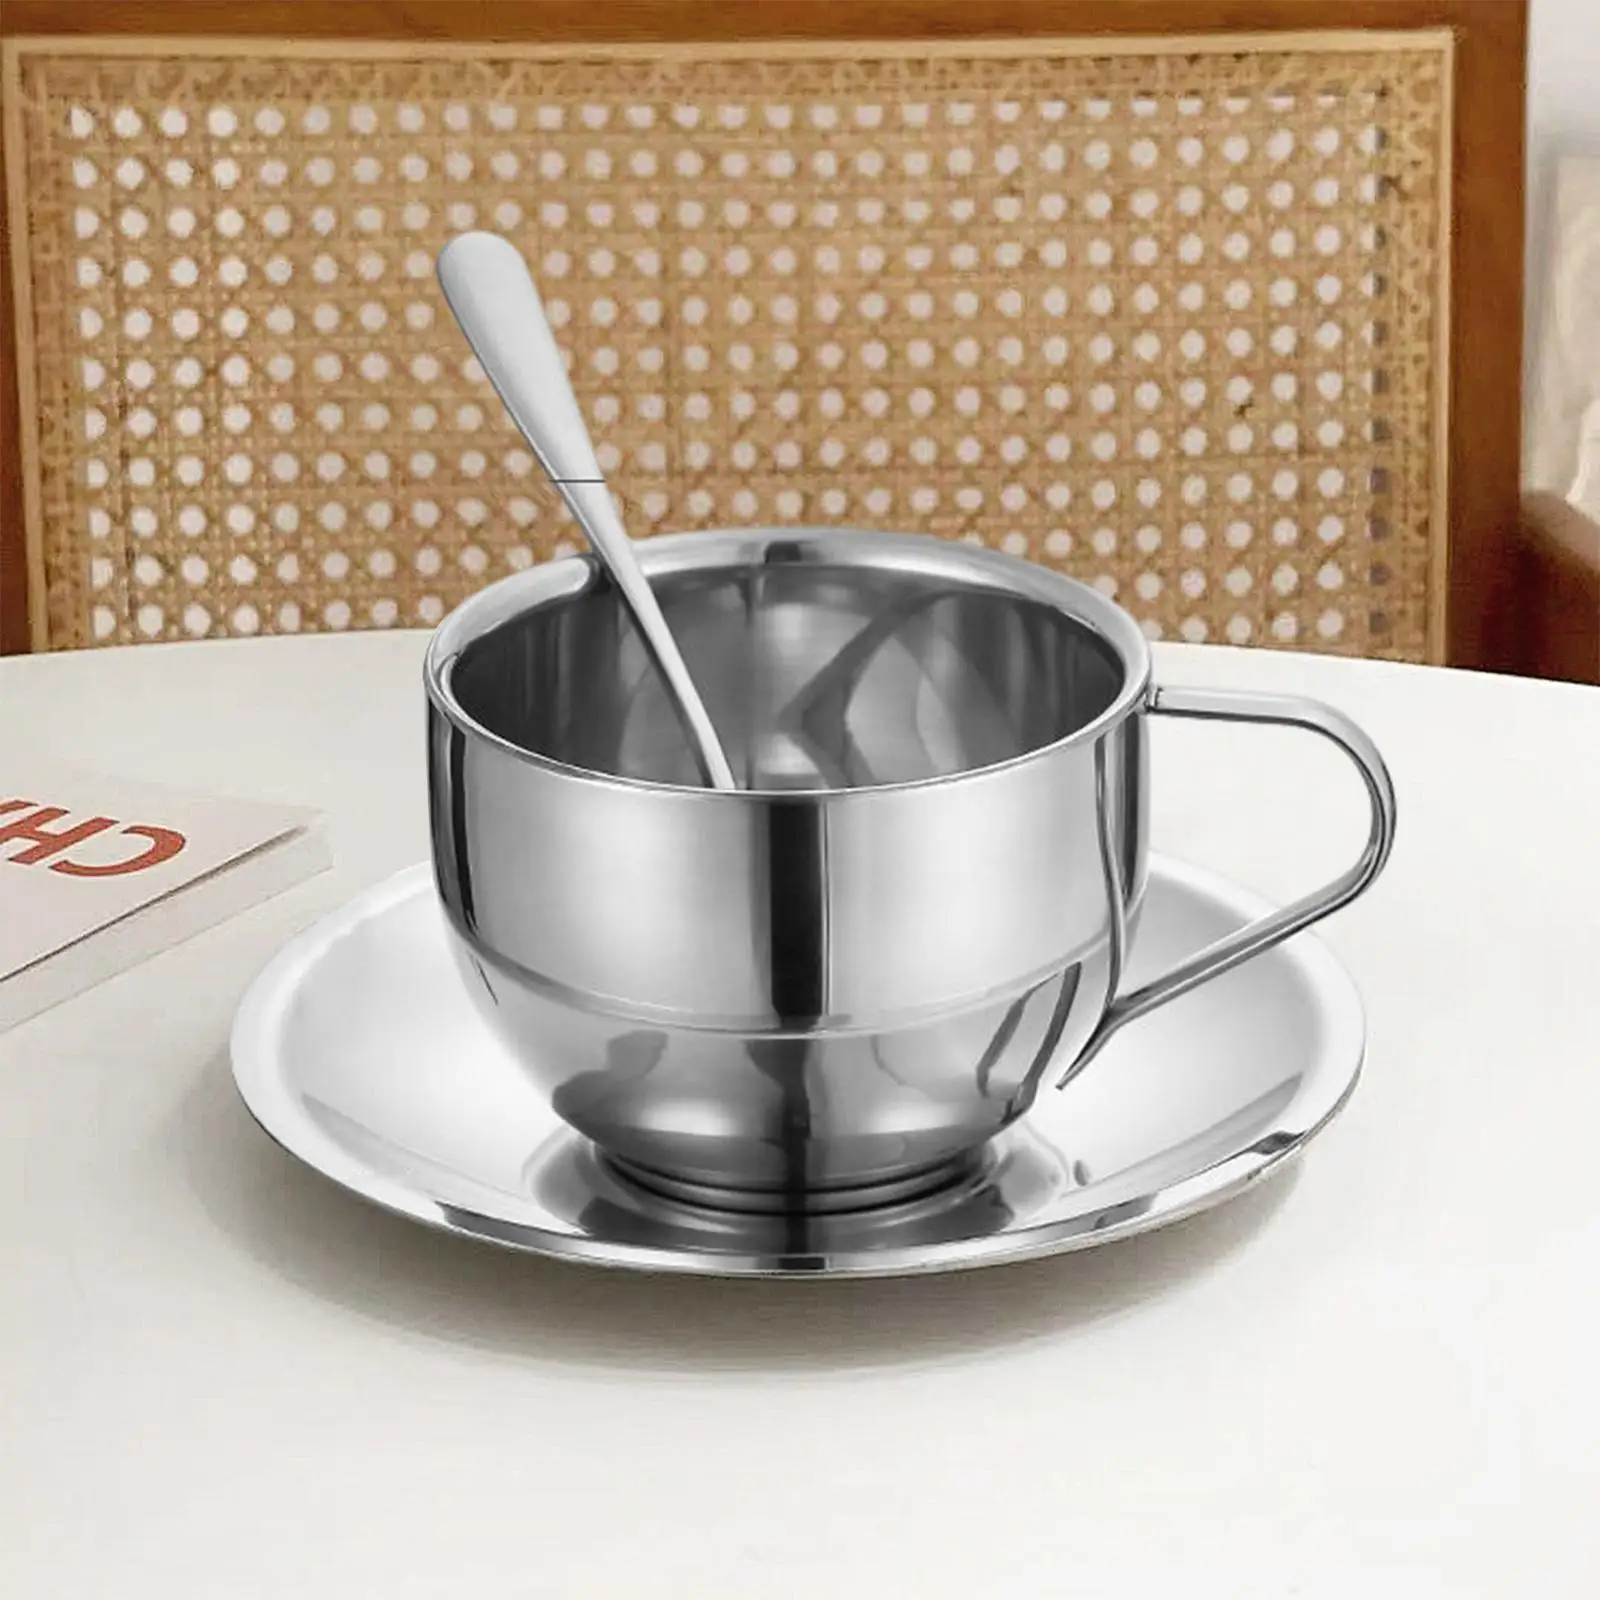 Stainless Steel Insulated Coffee Cup  Tea Milk Mug with Saucer Spoon Tableware Set